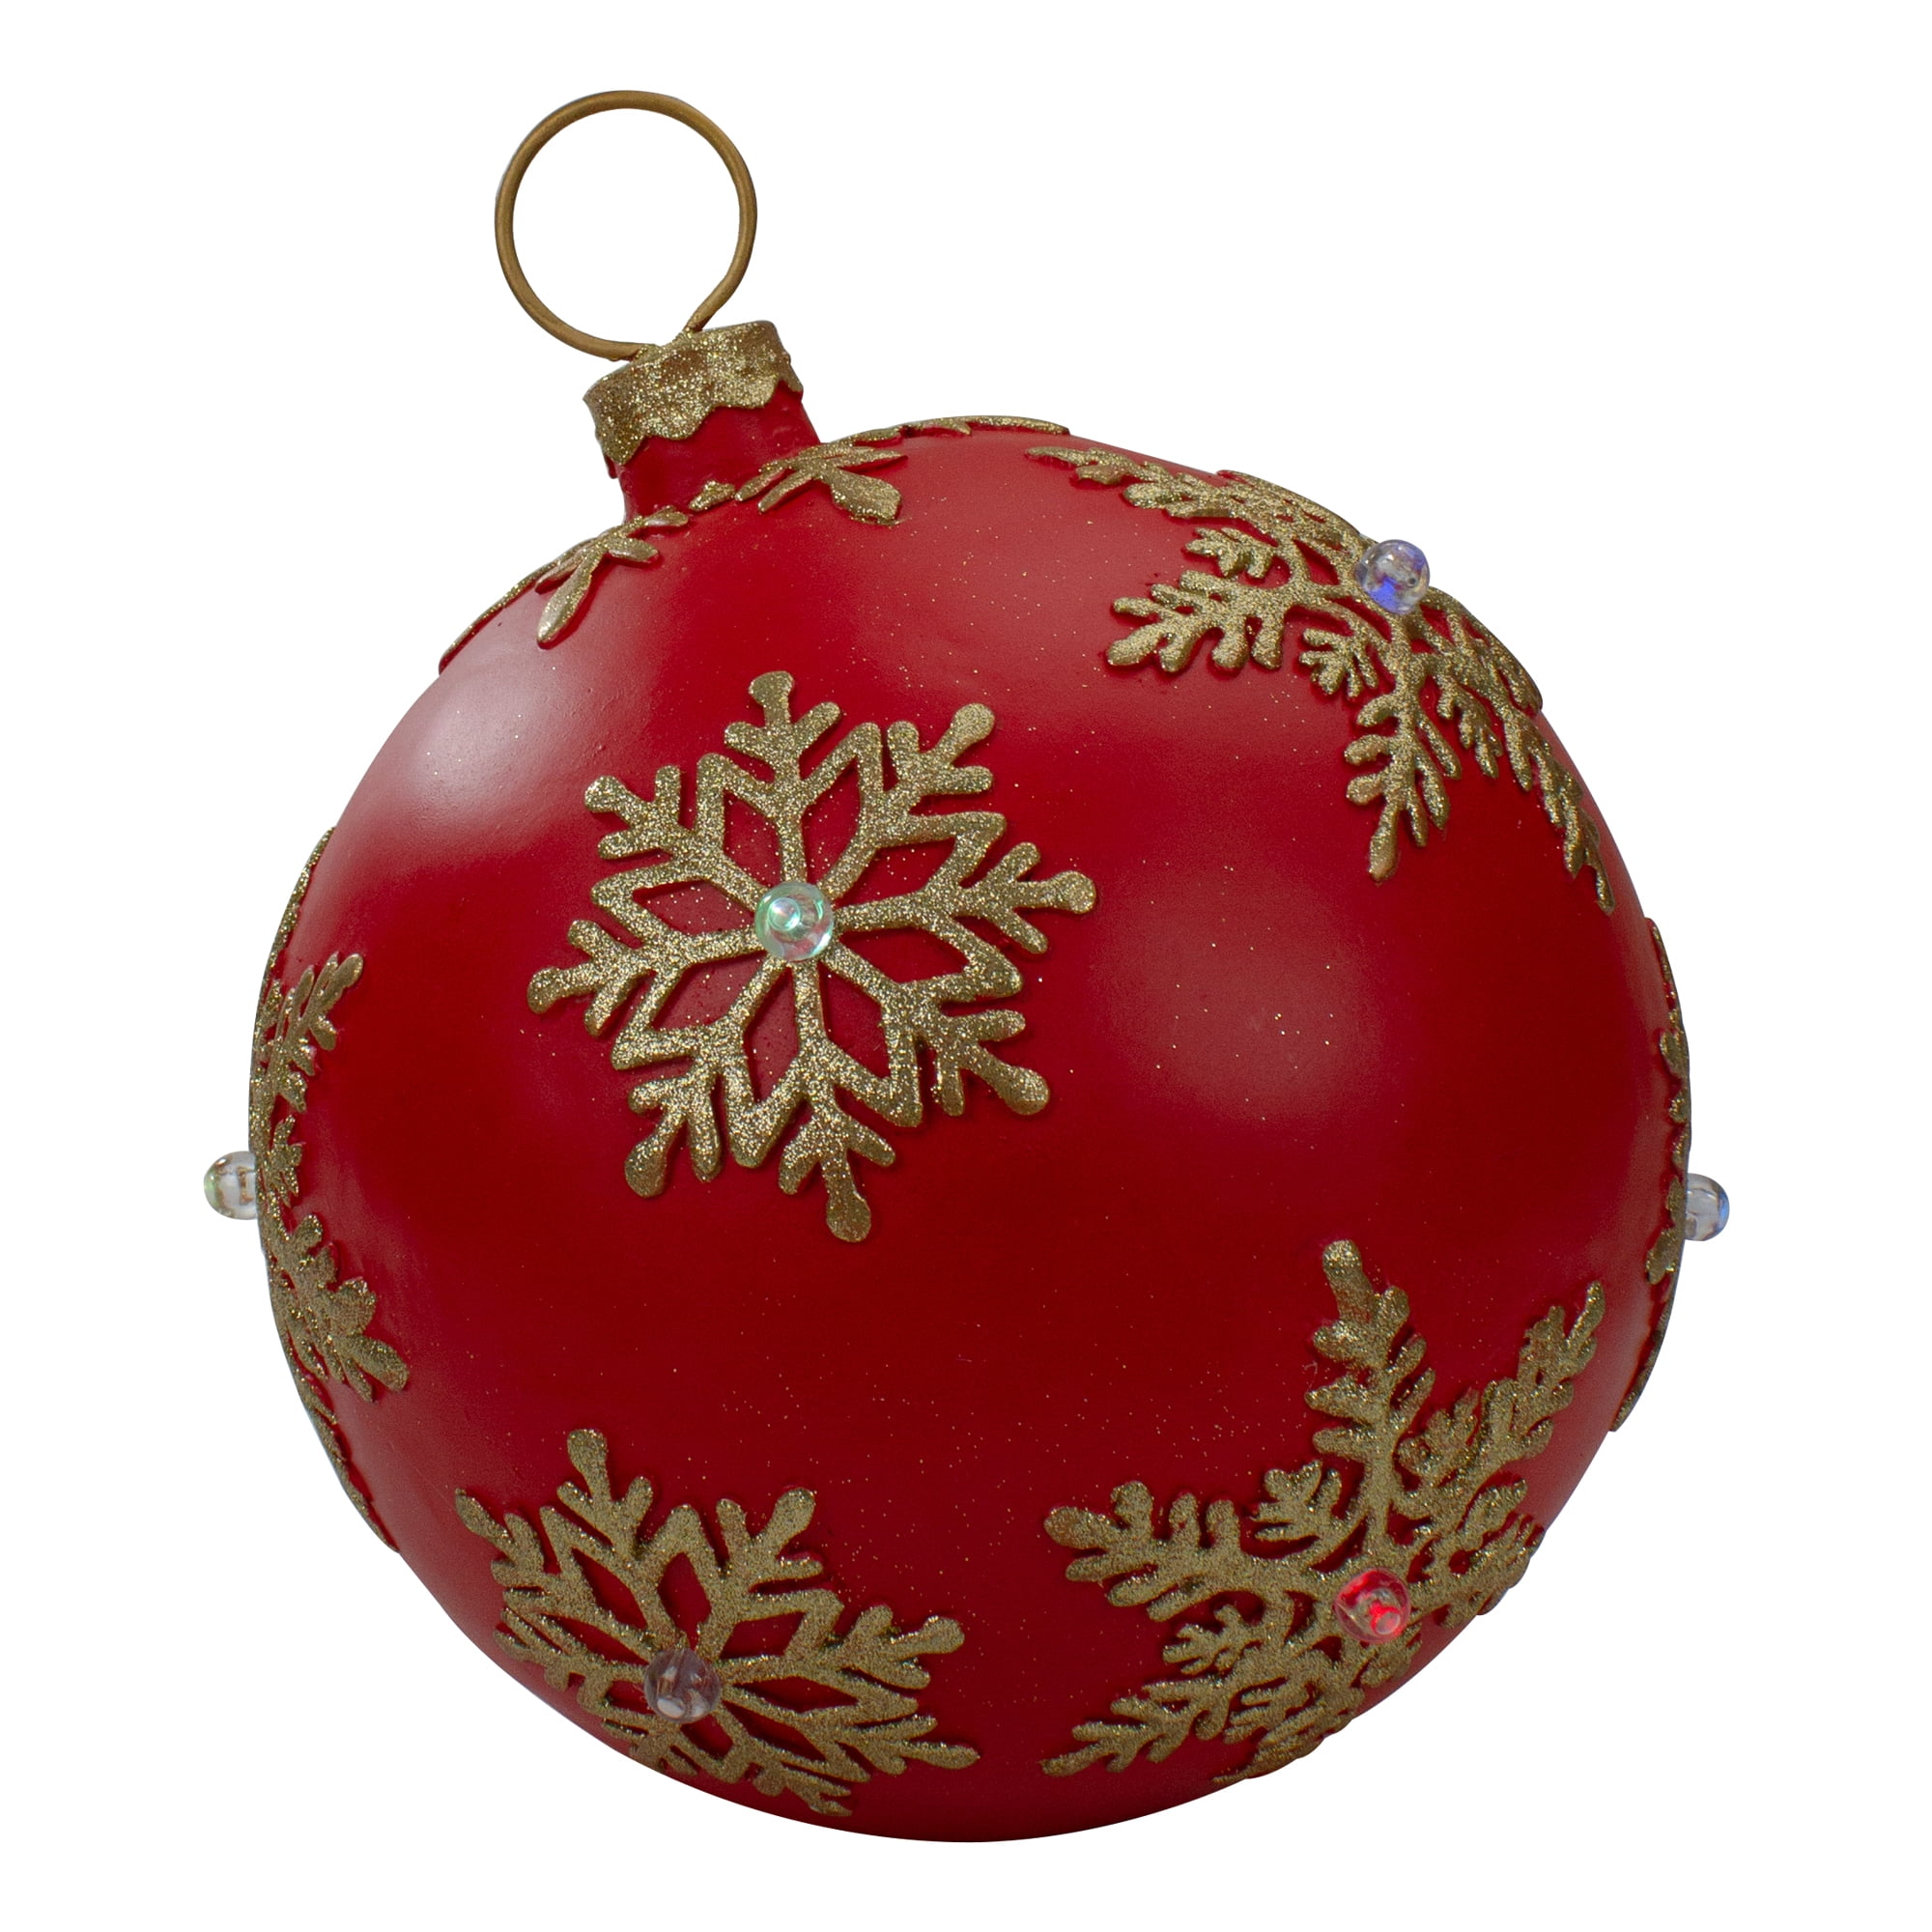 Beer Pong Maroon Yellow 3.5 inch Resin Decorative Christmas Ornament 